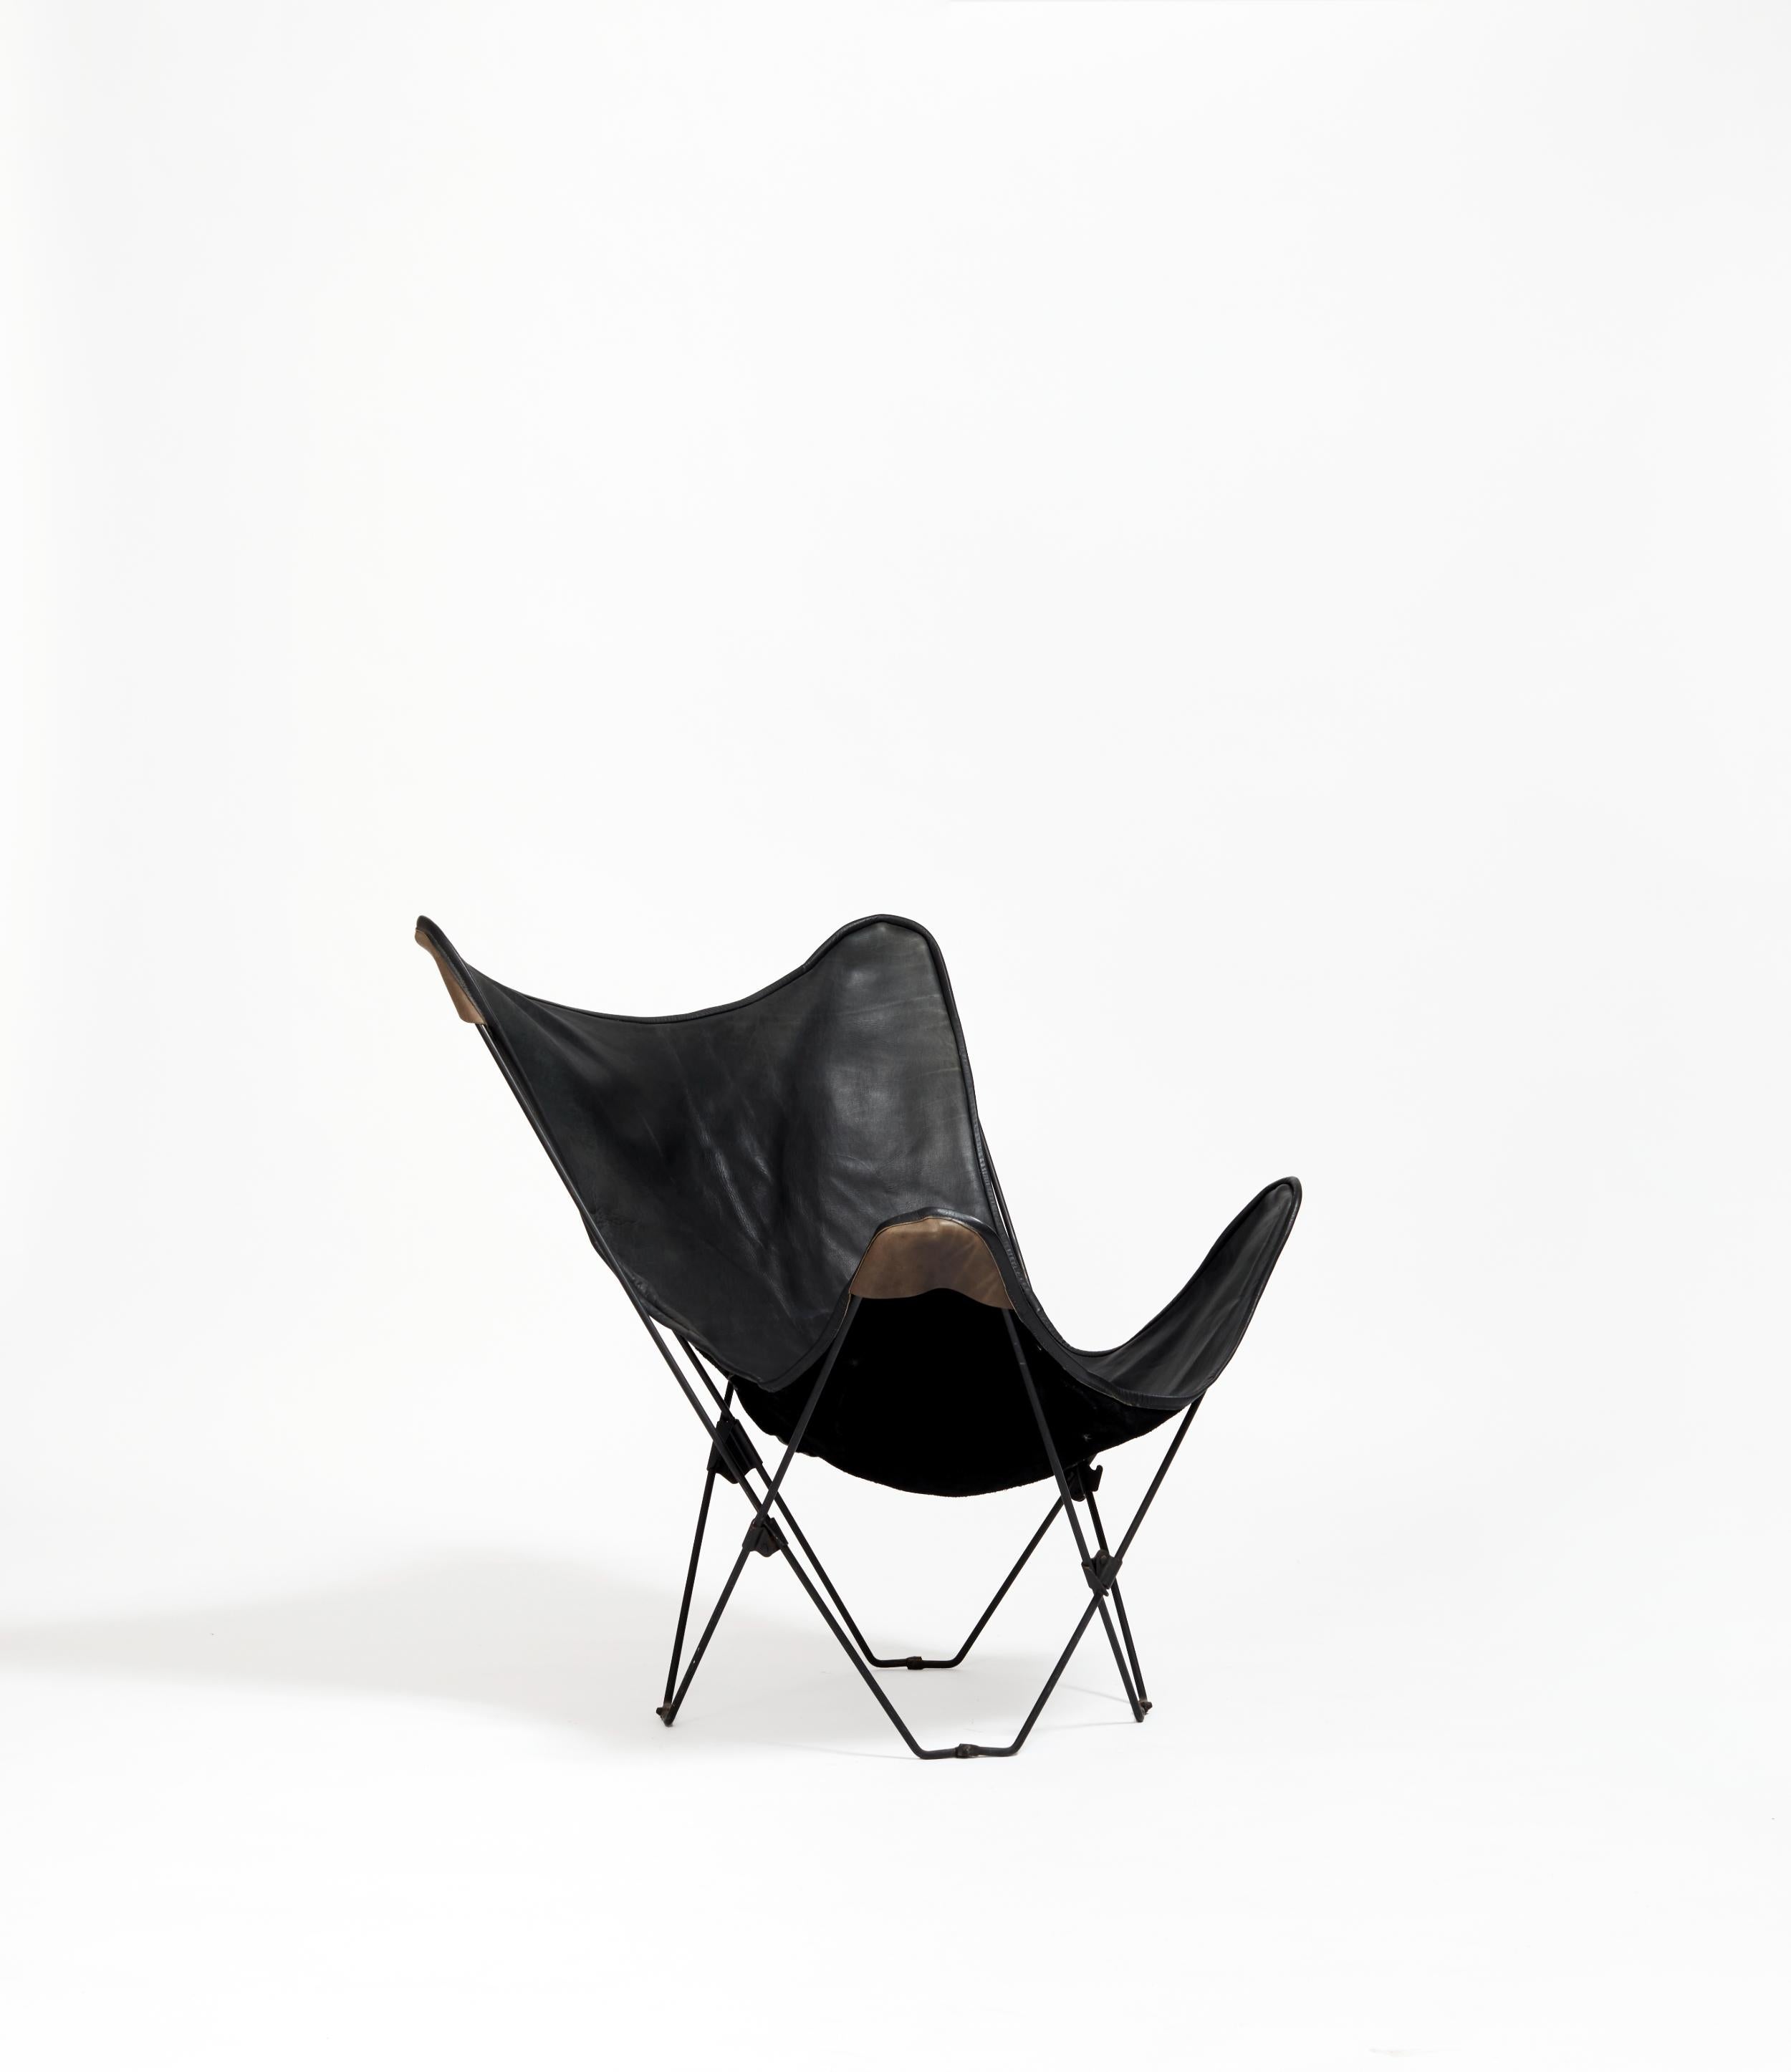 The Butterfly Chair is a ubiquitously Argentinian innovation – reflecting the region’s penchant for seemingly effortless design. The low shape, made of leather and iron, expresses in its silhouette the delicately symmetric sprawl of butterfly wings;